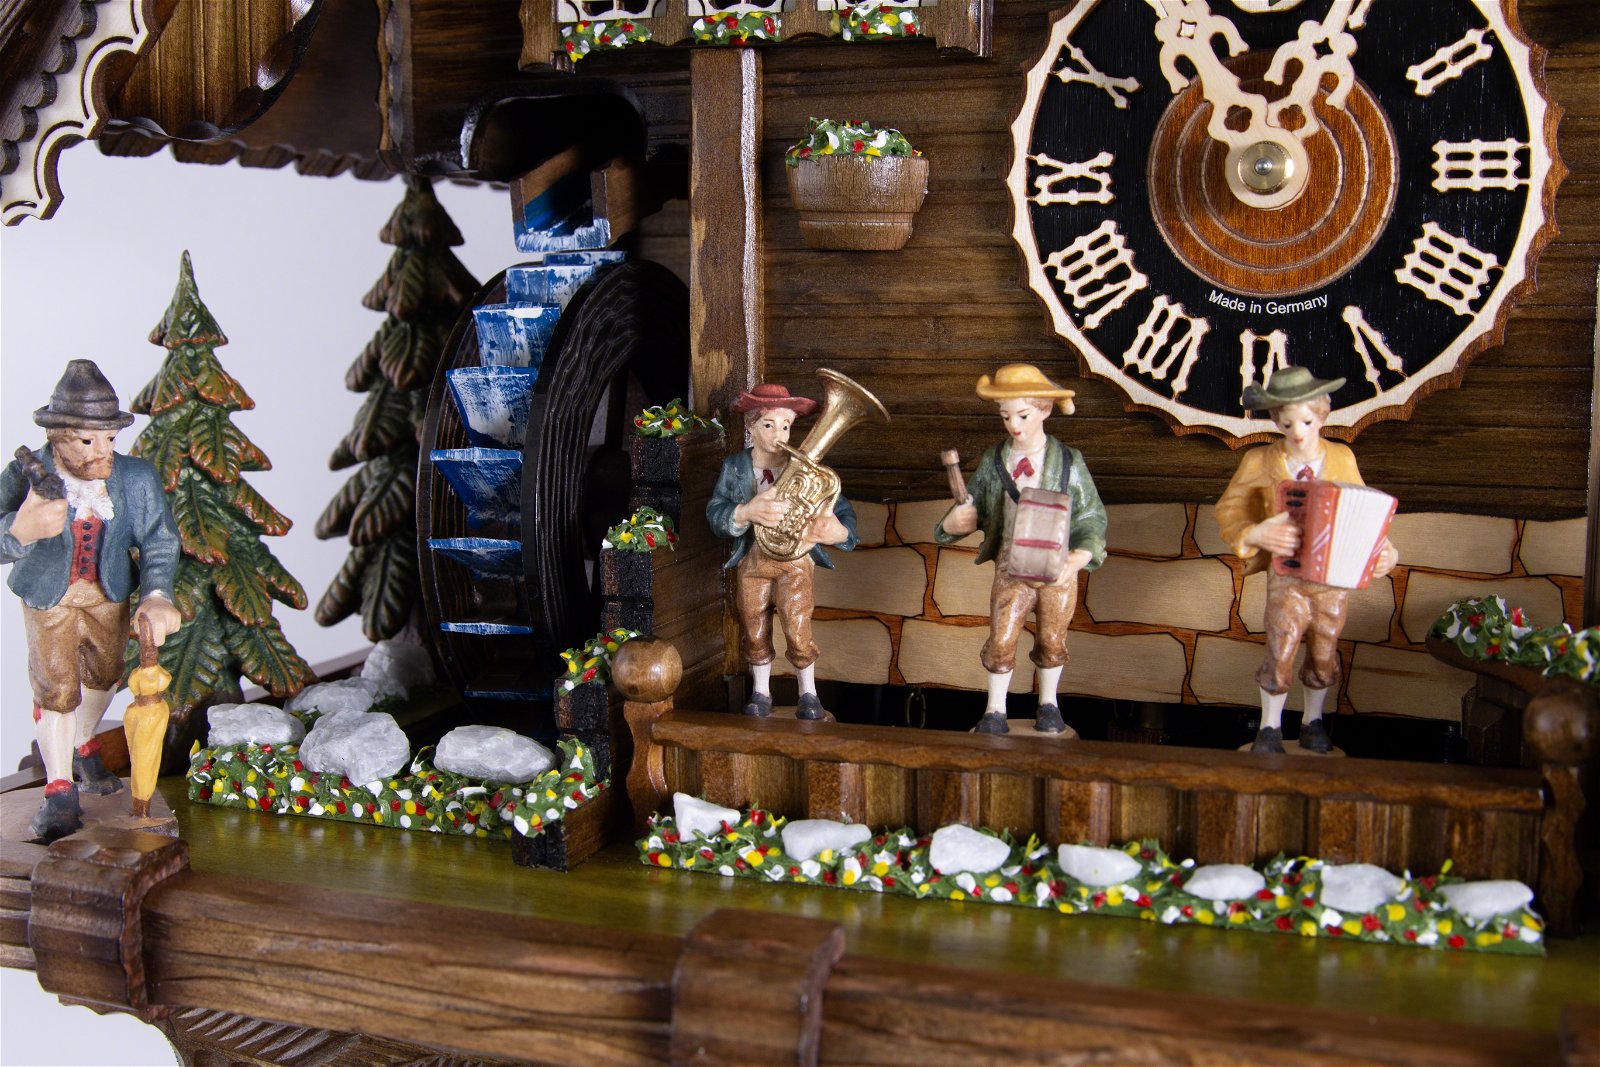 Cuckoo Clock Chalet Style 8 Day Movement 50cm by Hönes